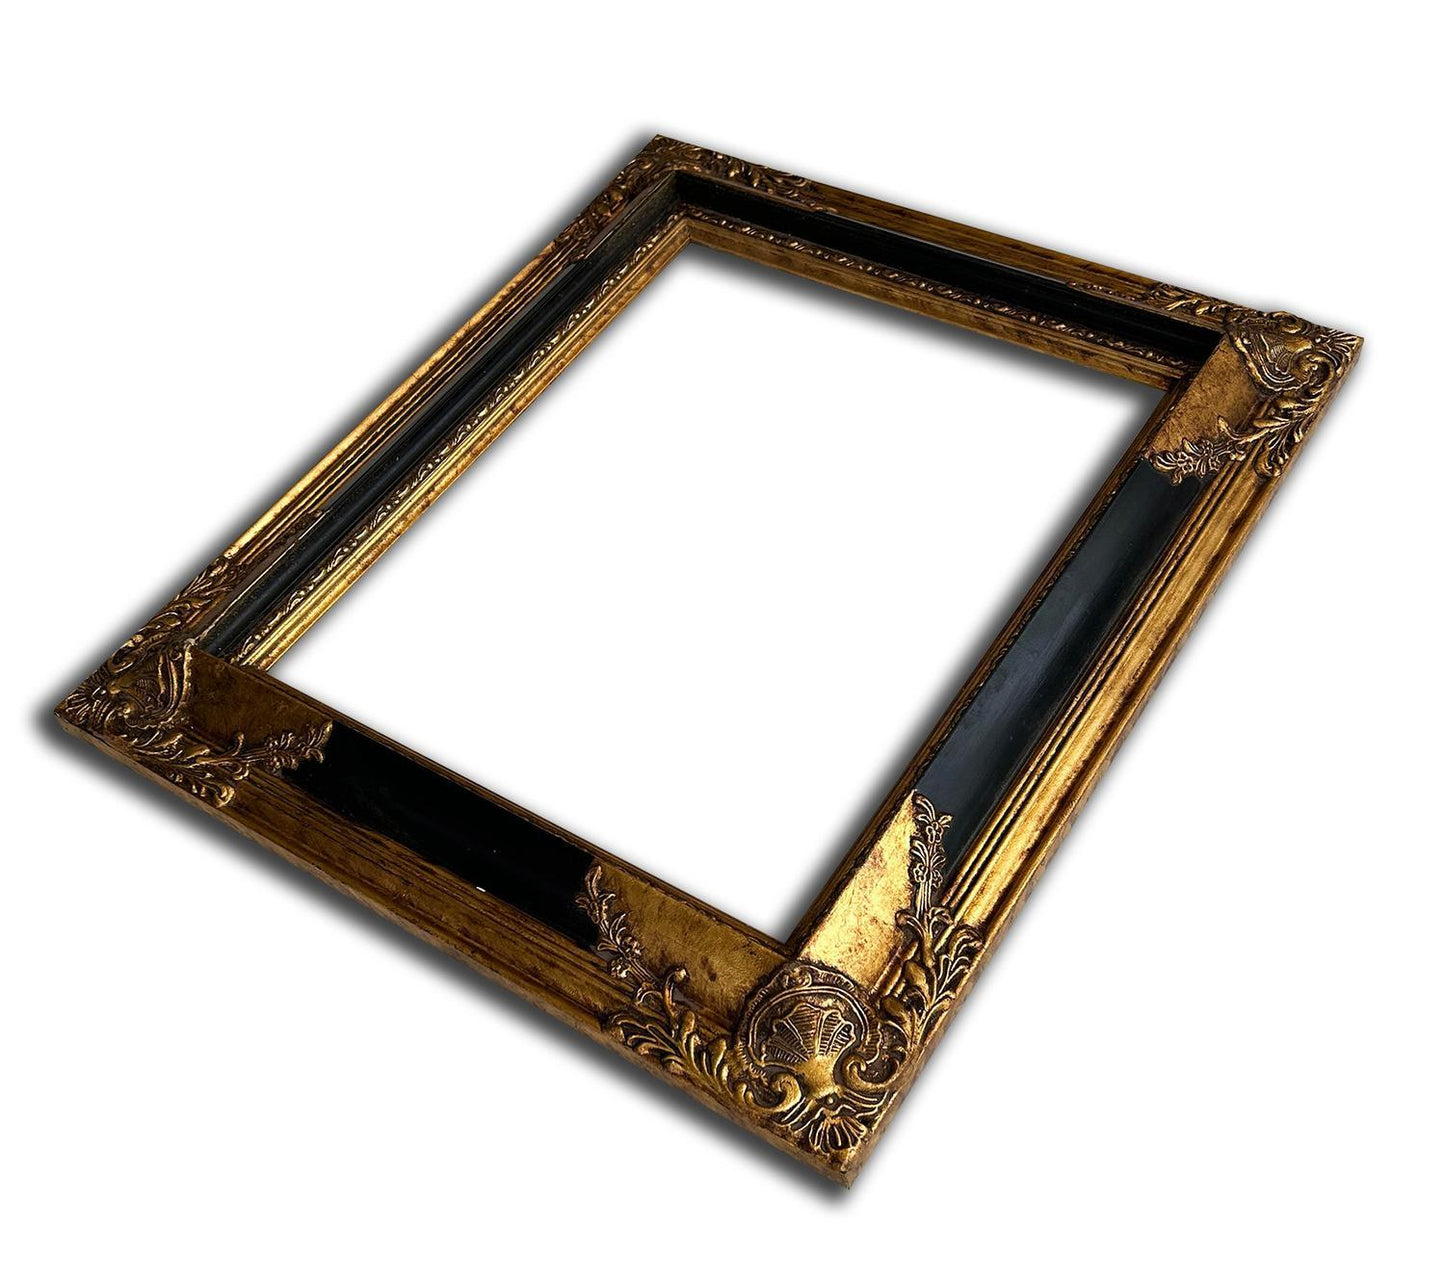 33x40 cm or 13x16 ins, wooden photo frame